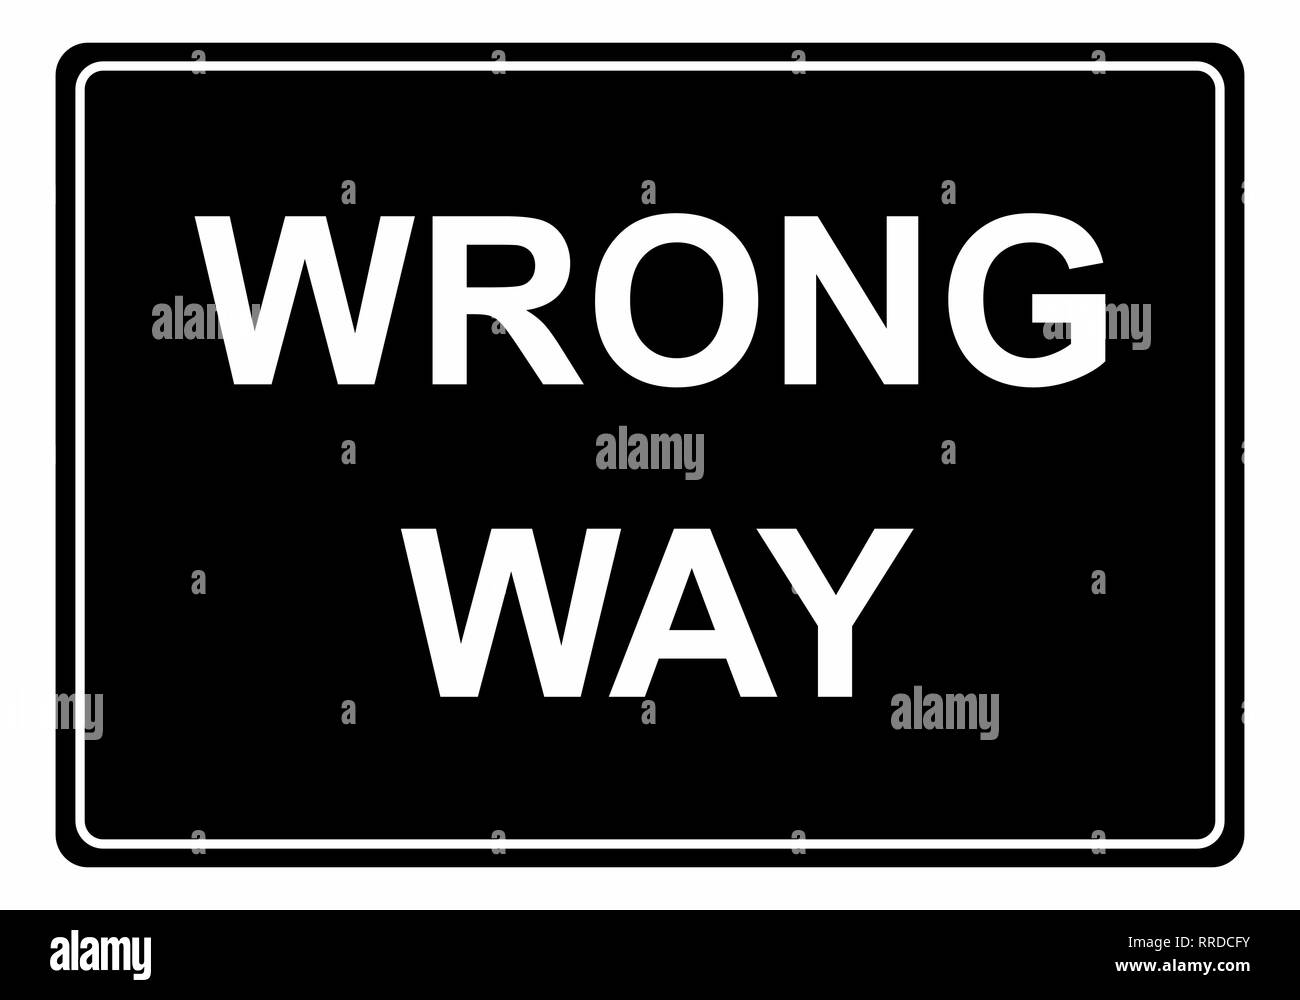 Illustration of a Wrong way traffic sign Stock Vector